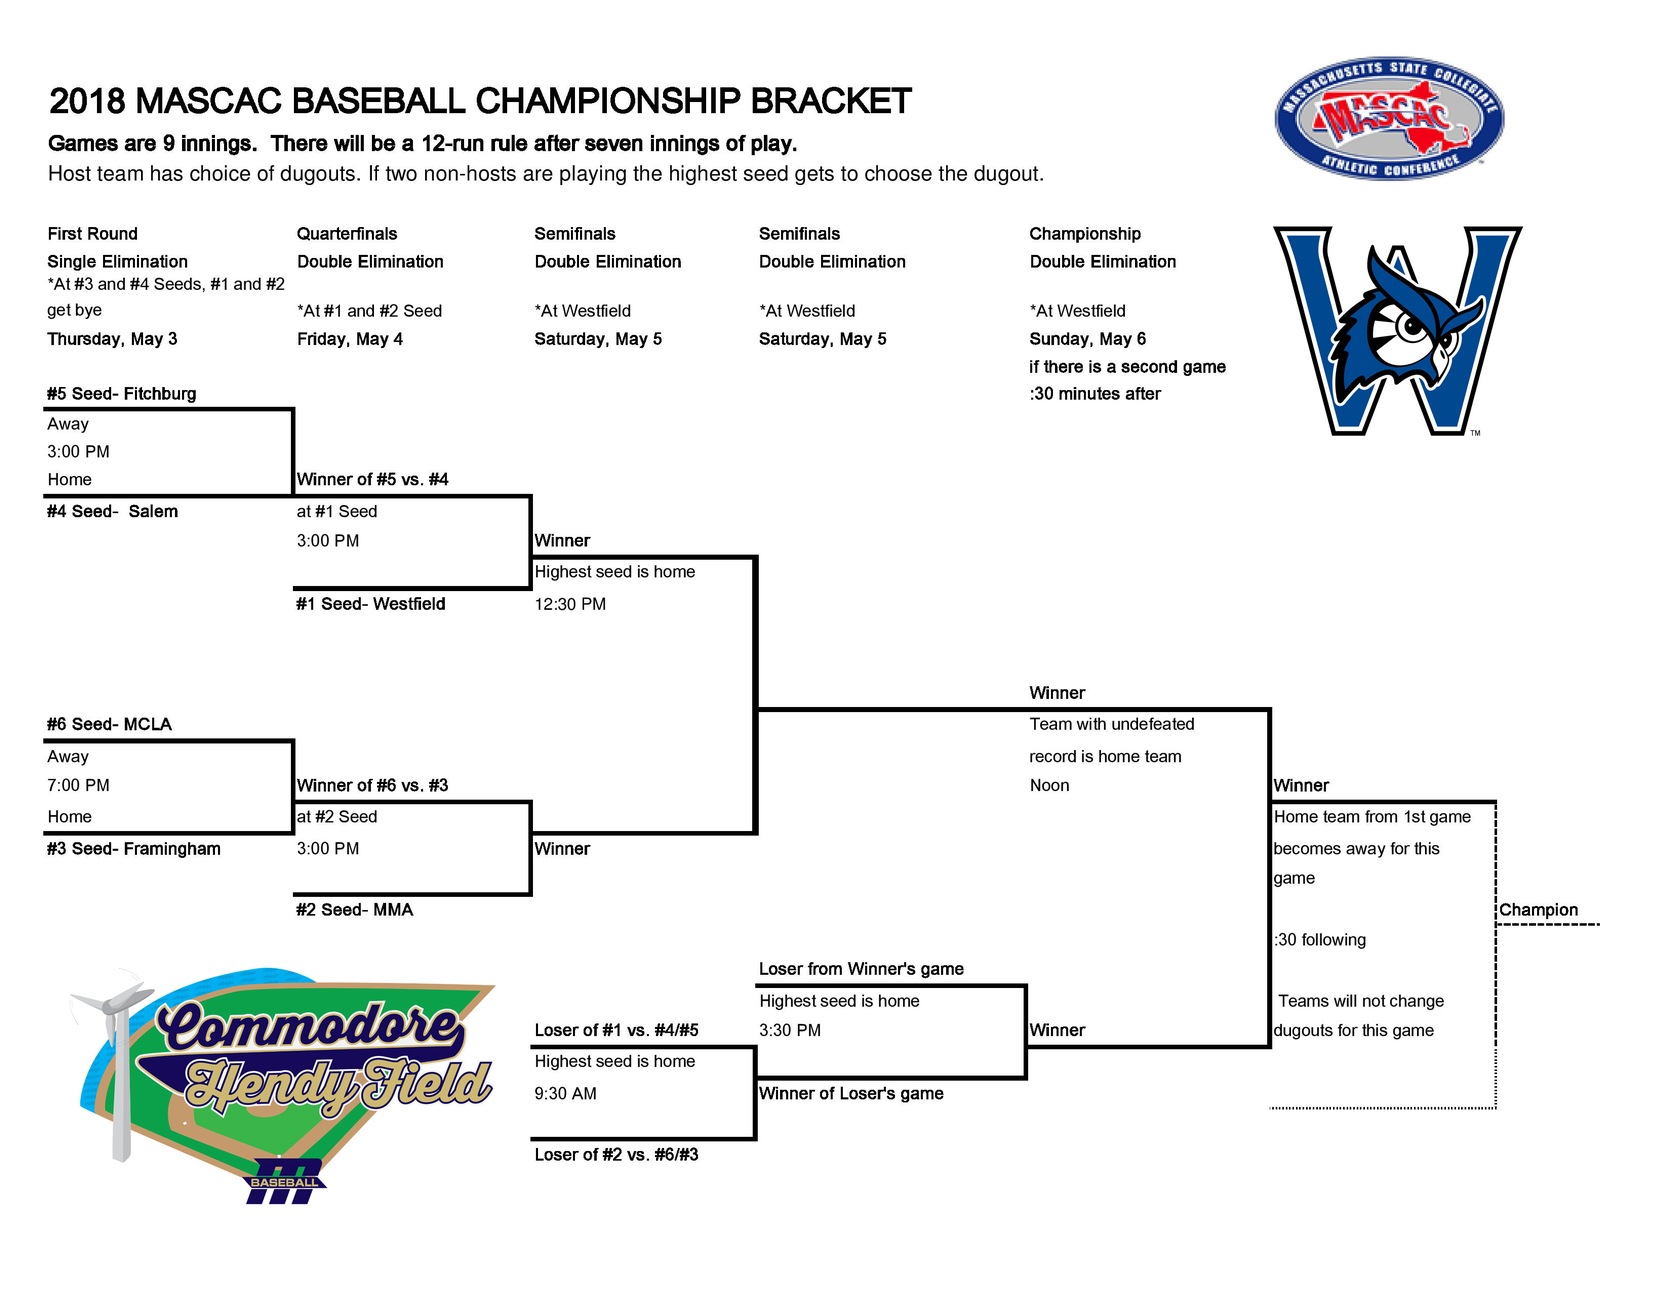 Buccaneers Draw No. 2 Seed in MASCAC Tourney